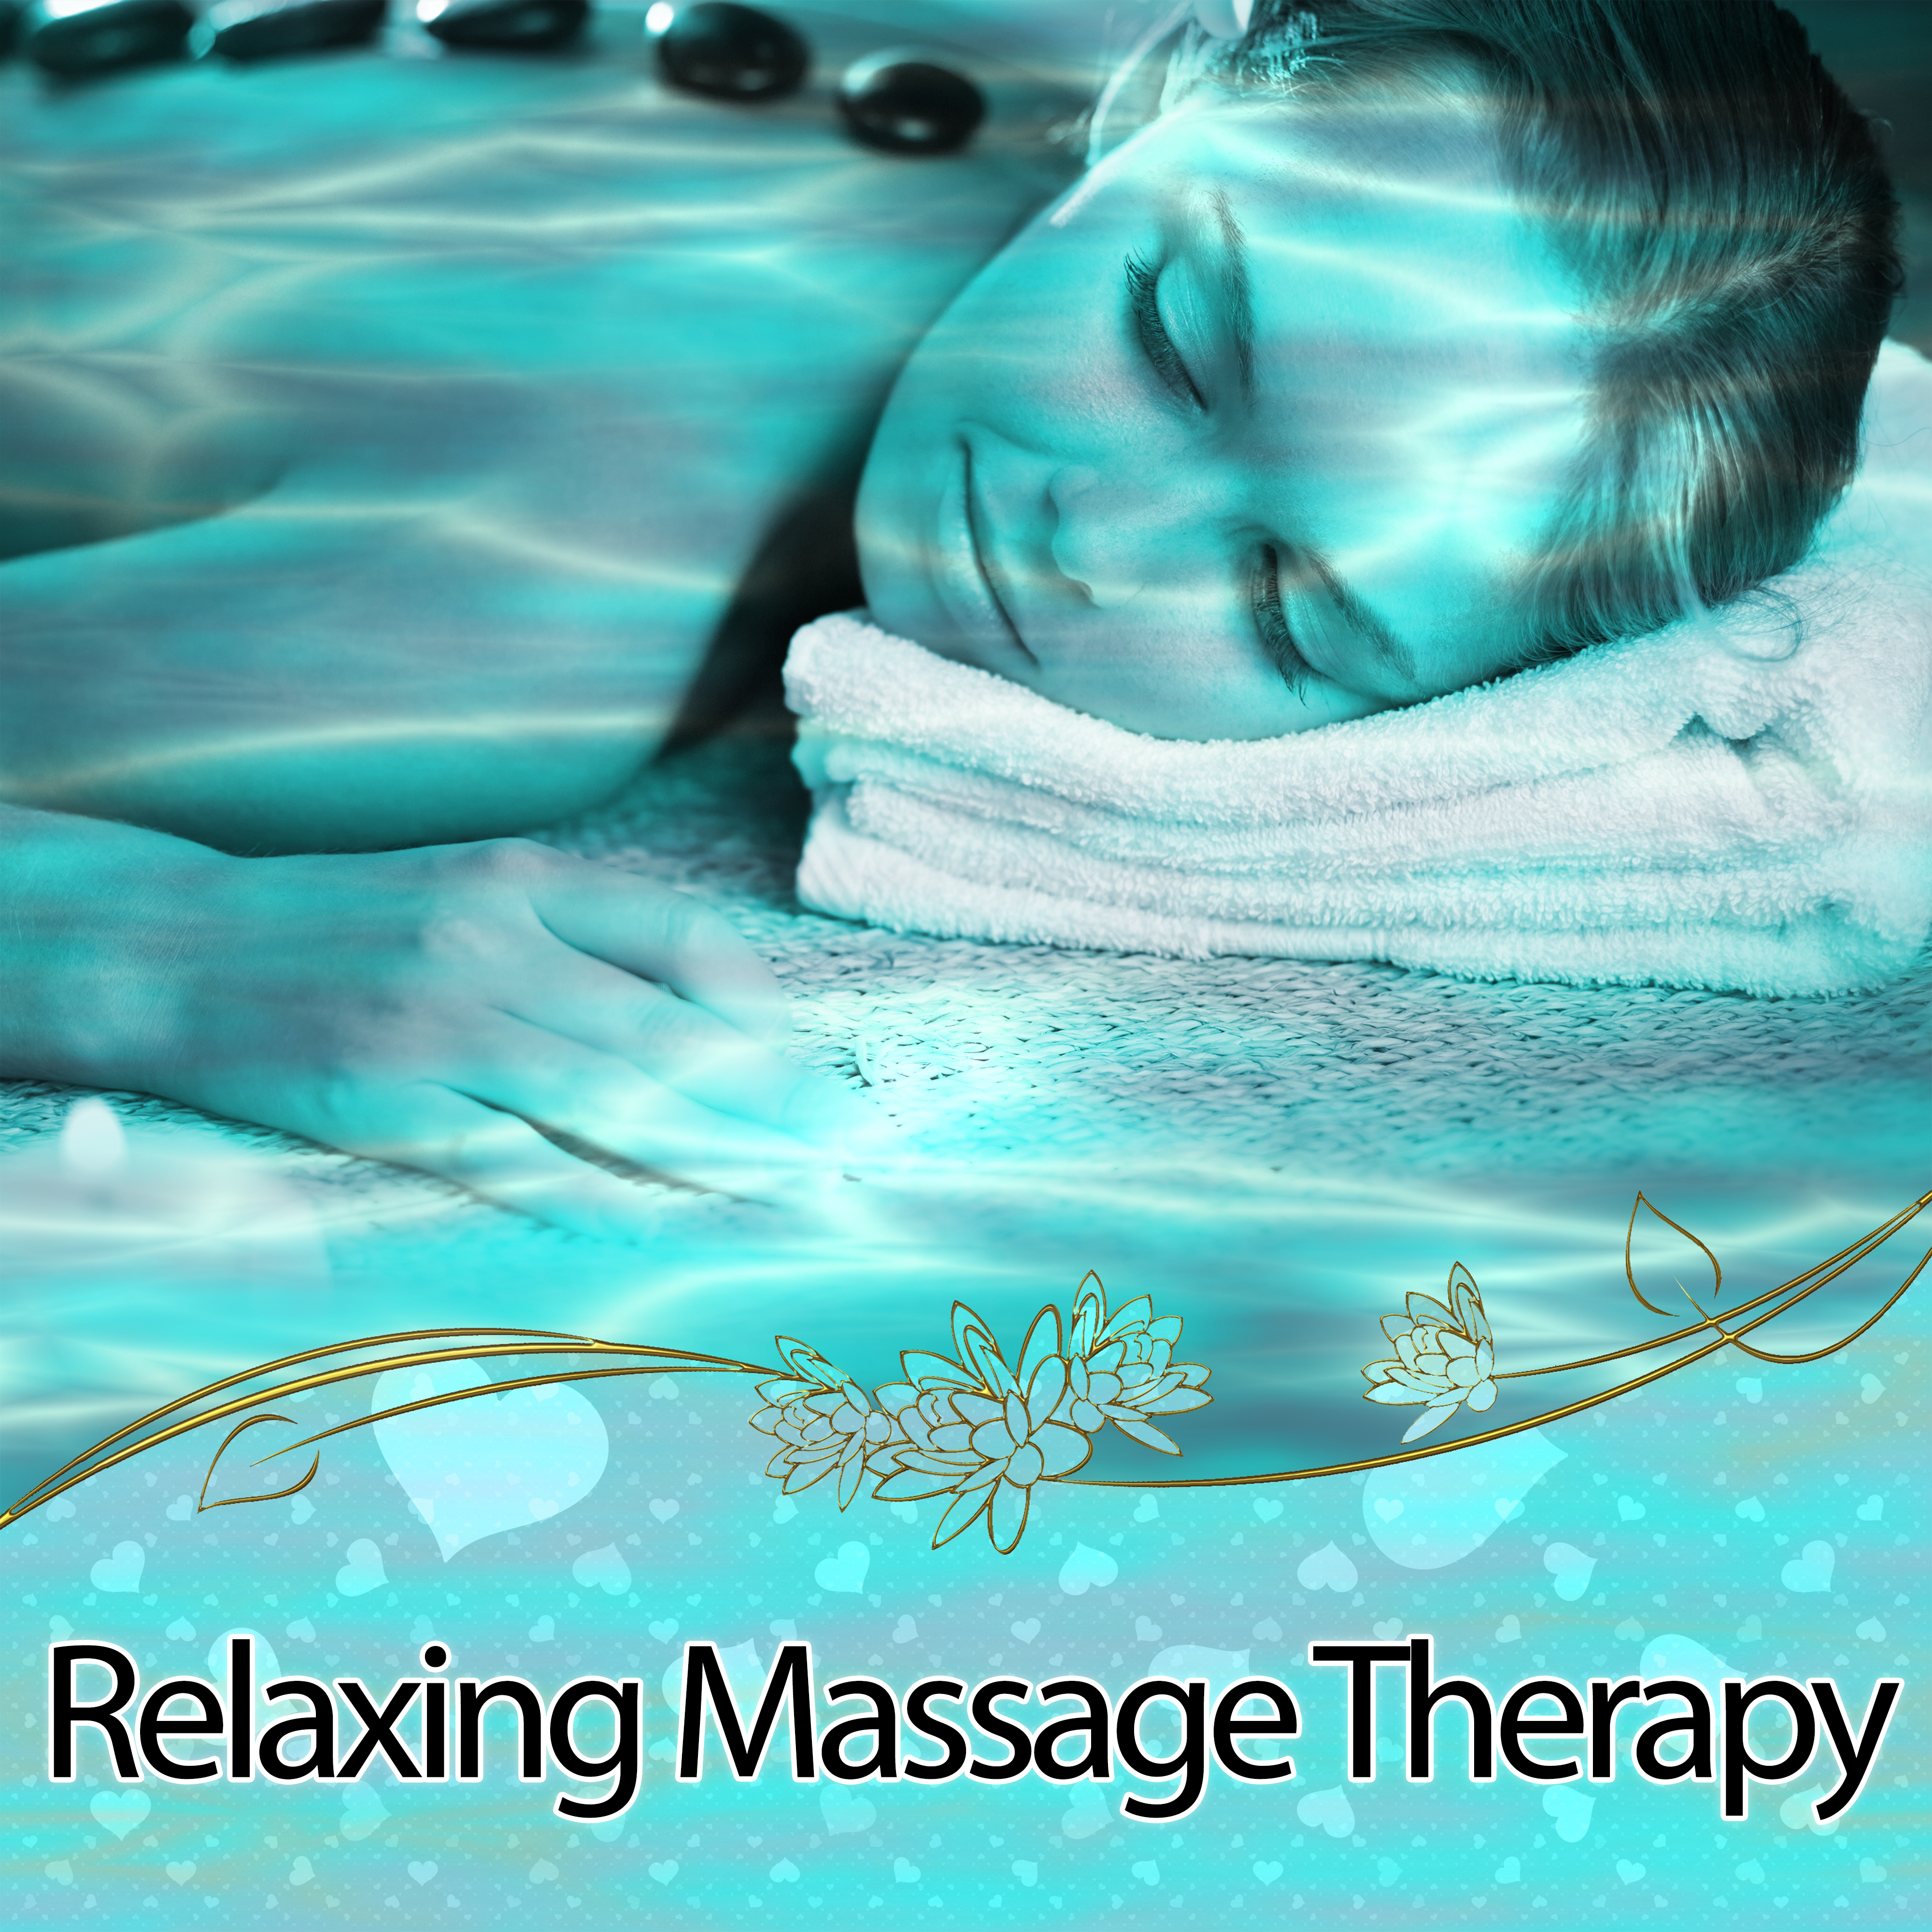 Relaxing Massage Therapy – New Age Sounds of Tibet for Relax, Background Music for Massage, Wellness, Spa